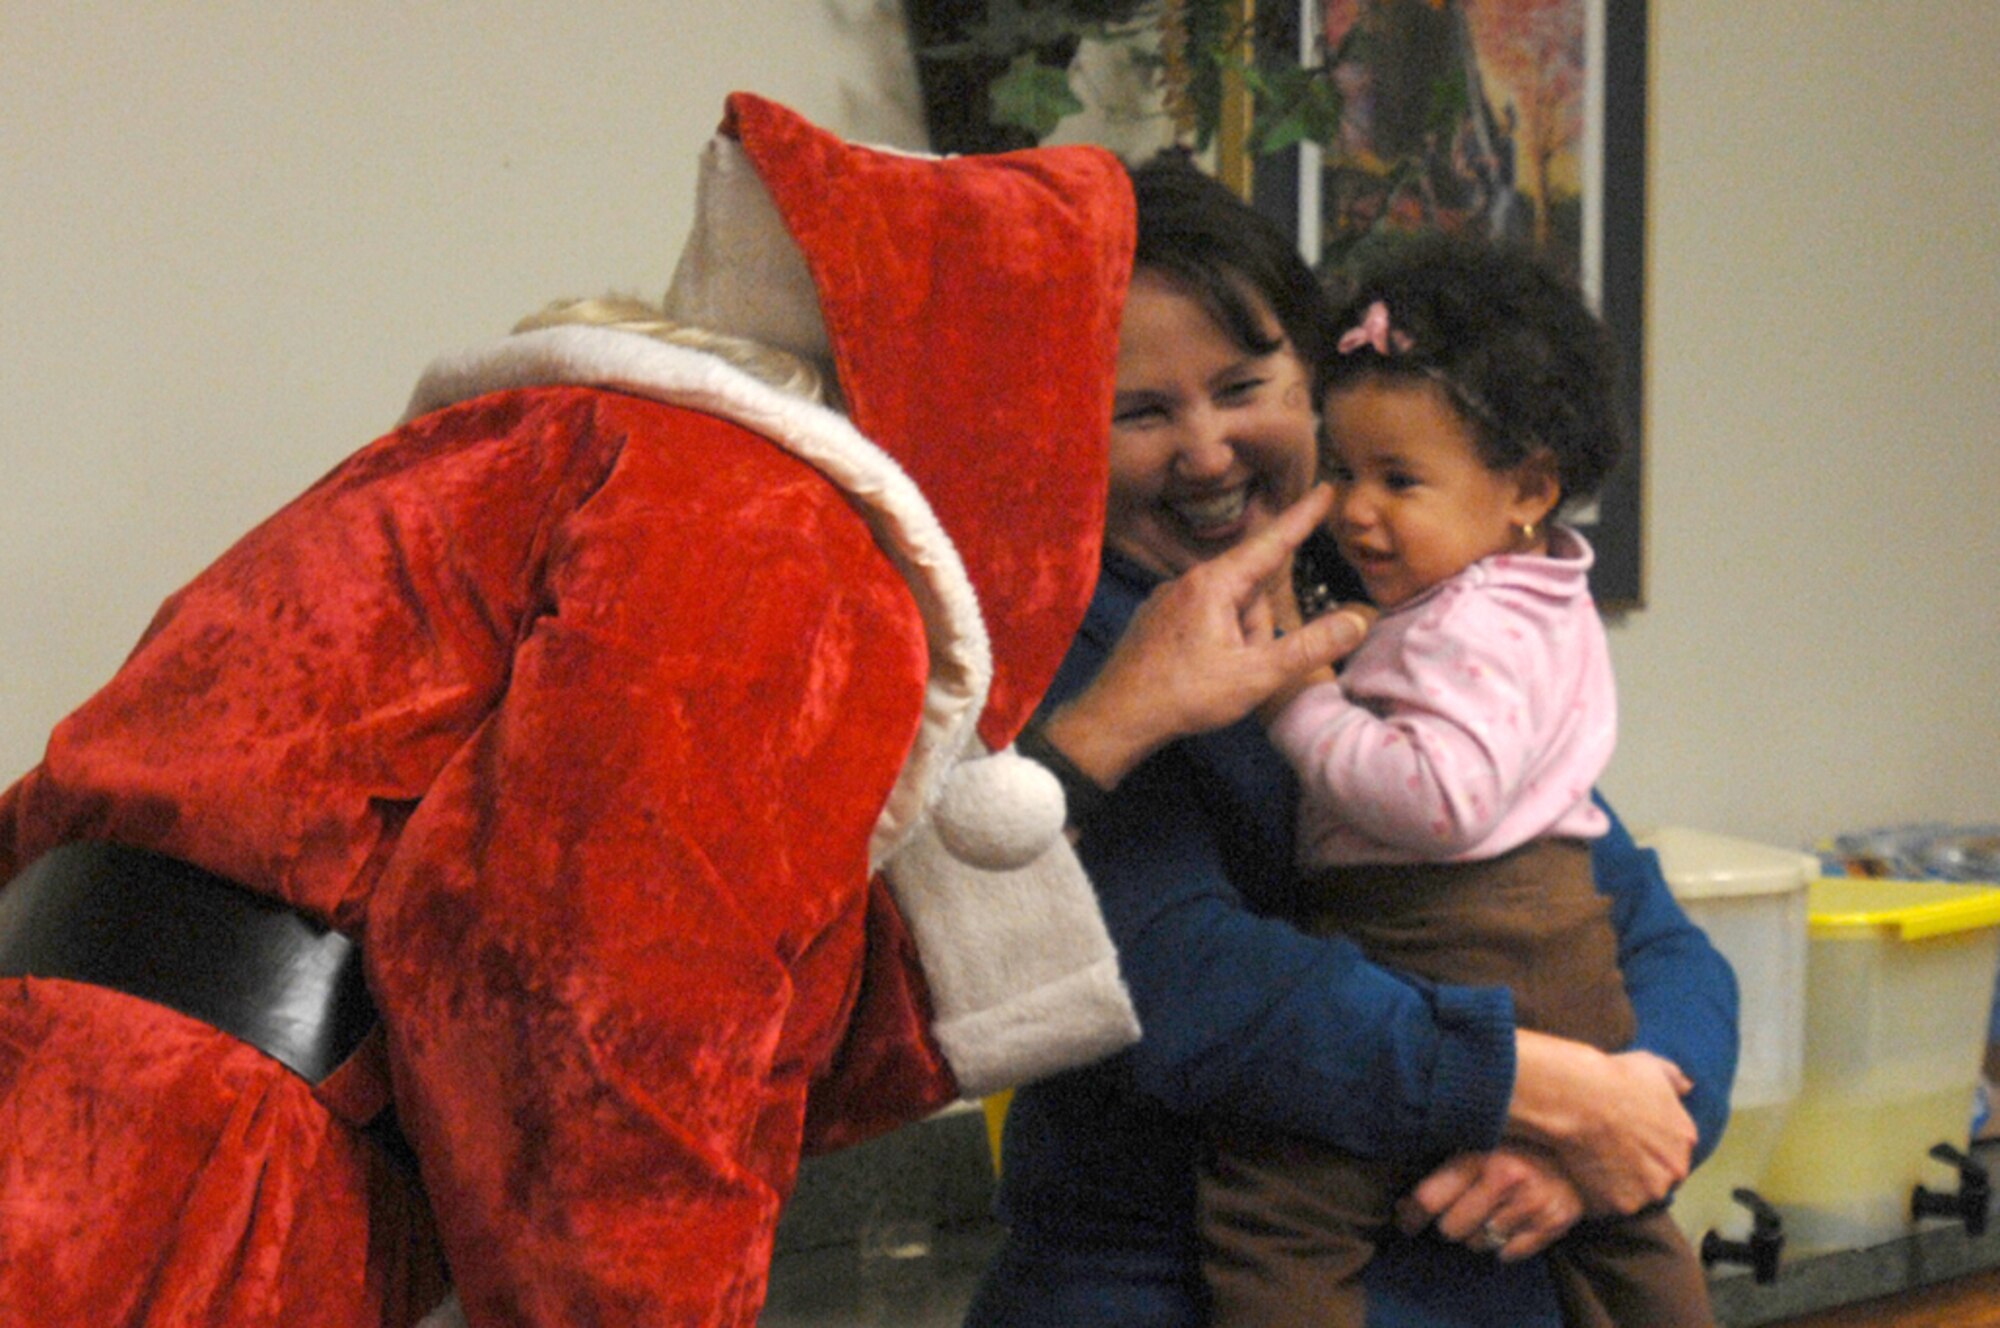 Santa Claus visits with a child during the Hearts Apart annual holiday party Dec. 4 at the Hurlburt Field Chapel. Throughout the year, the program sponsors a series of monthly gatherings for spouses and children of deployed members. (Air Force photo by Senior Airman Matthew Loken)